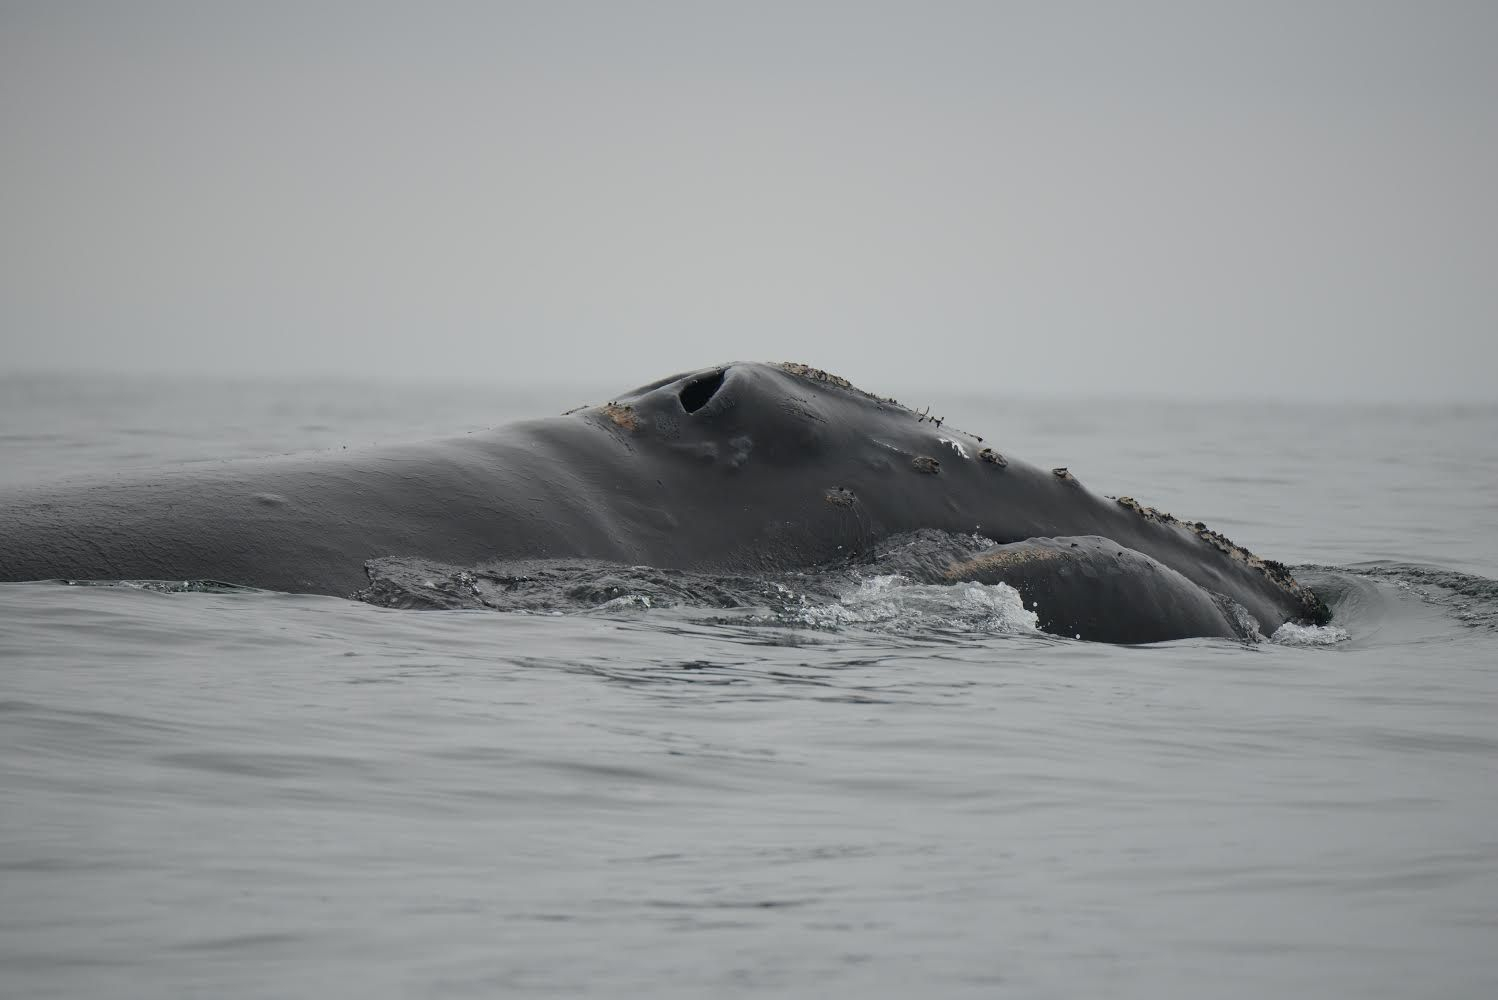 A rare sighting of a North Pacific Right Whale off the west coast of Haida Gwaii in June 2013. Photo by John Ford